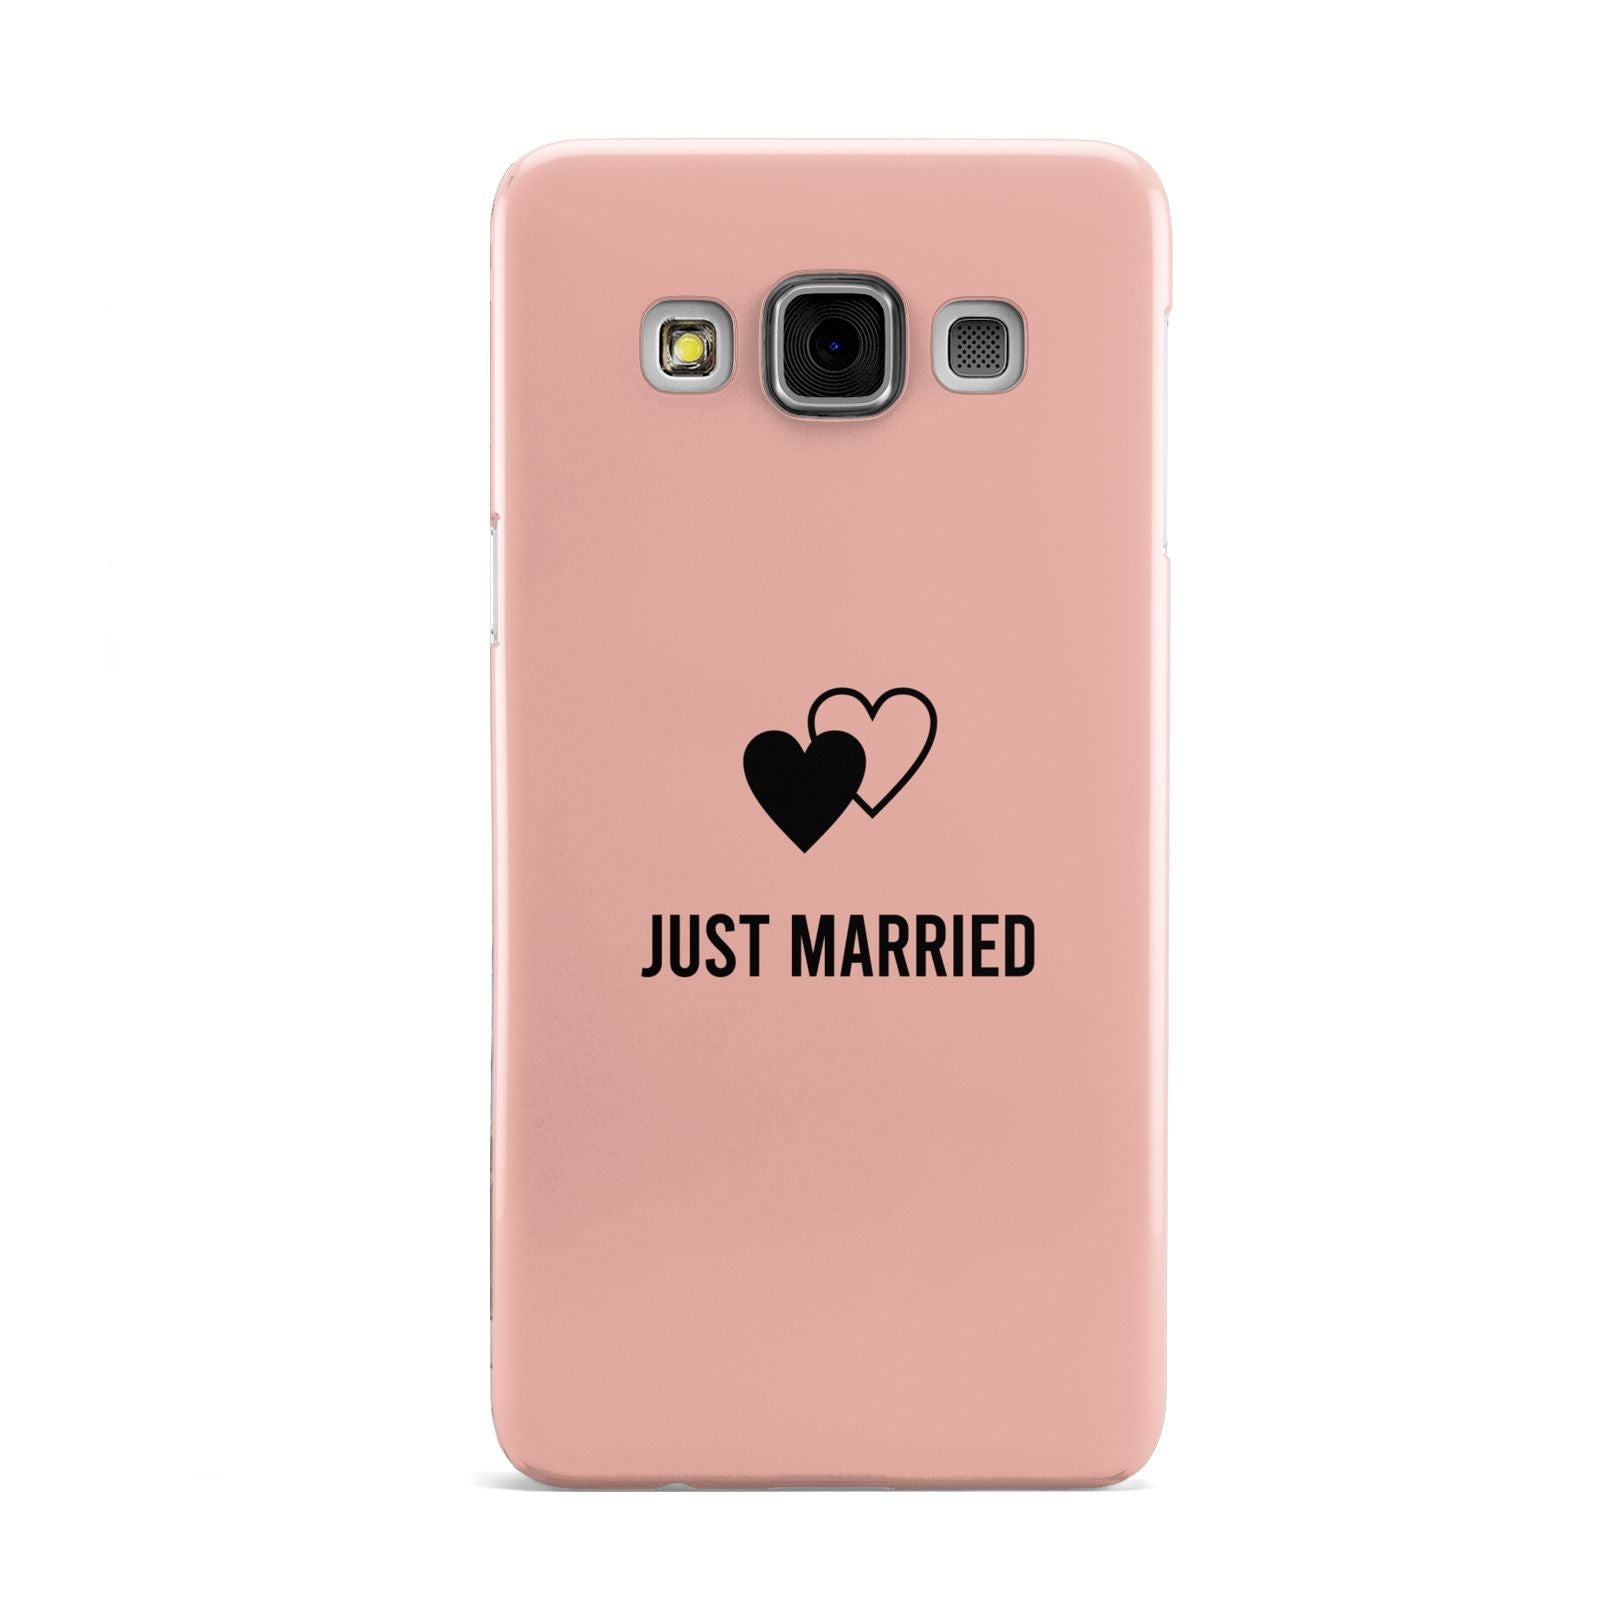 Just Married Samsung Galaxy A3 Case